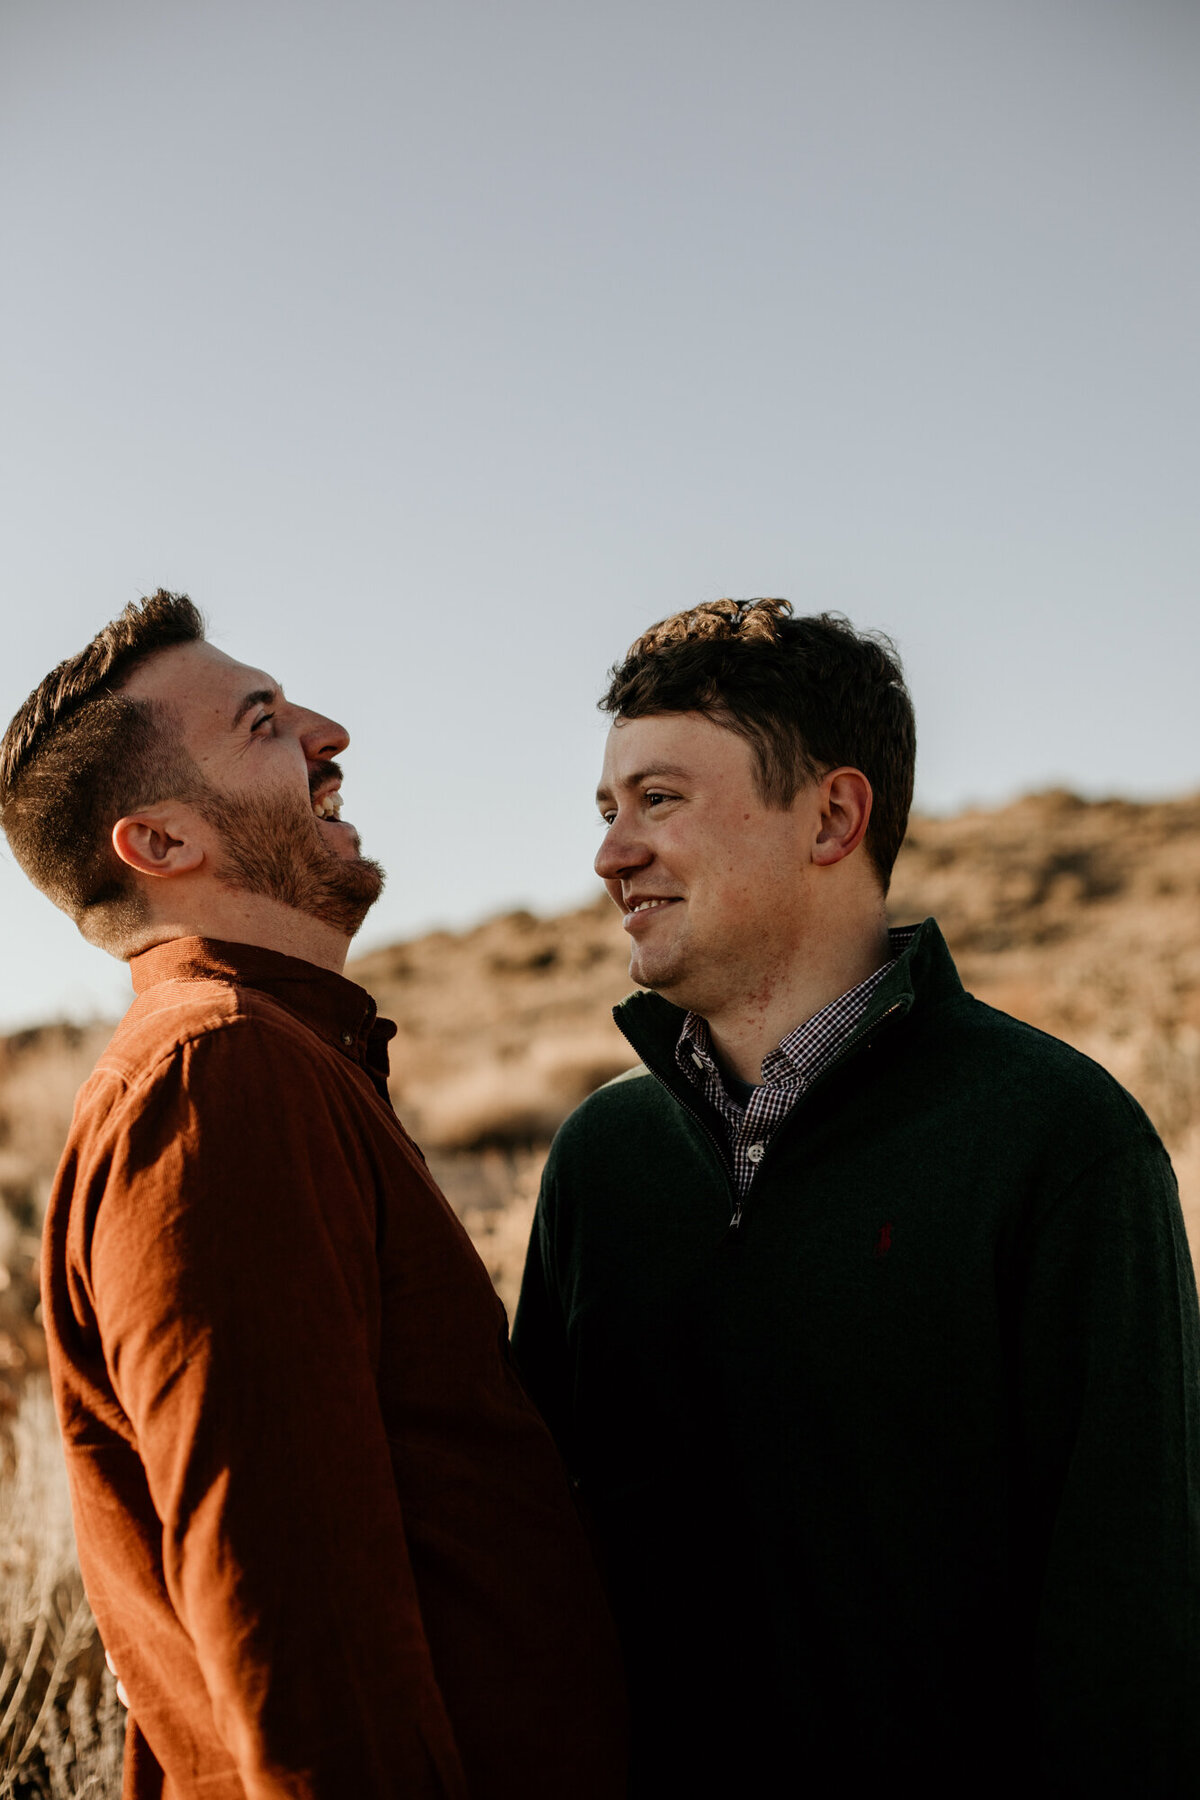 gay couple standing close and laughing